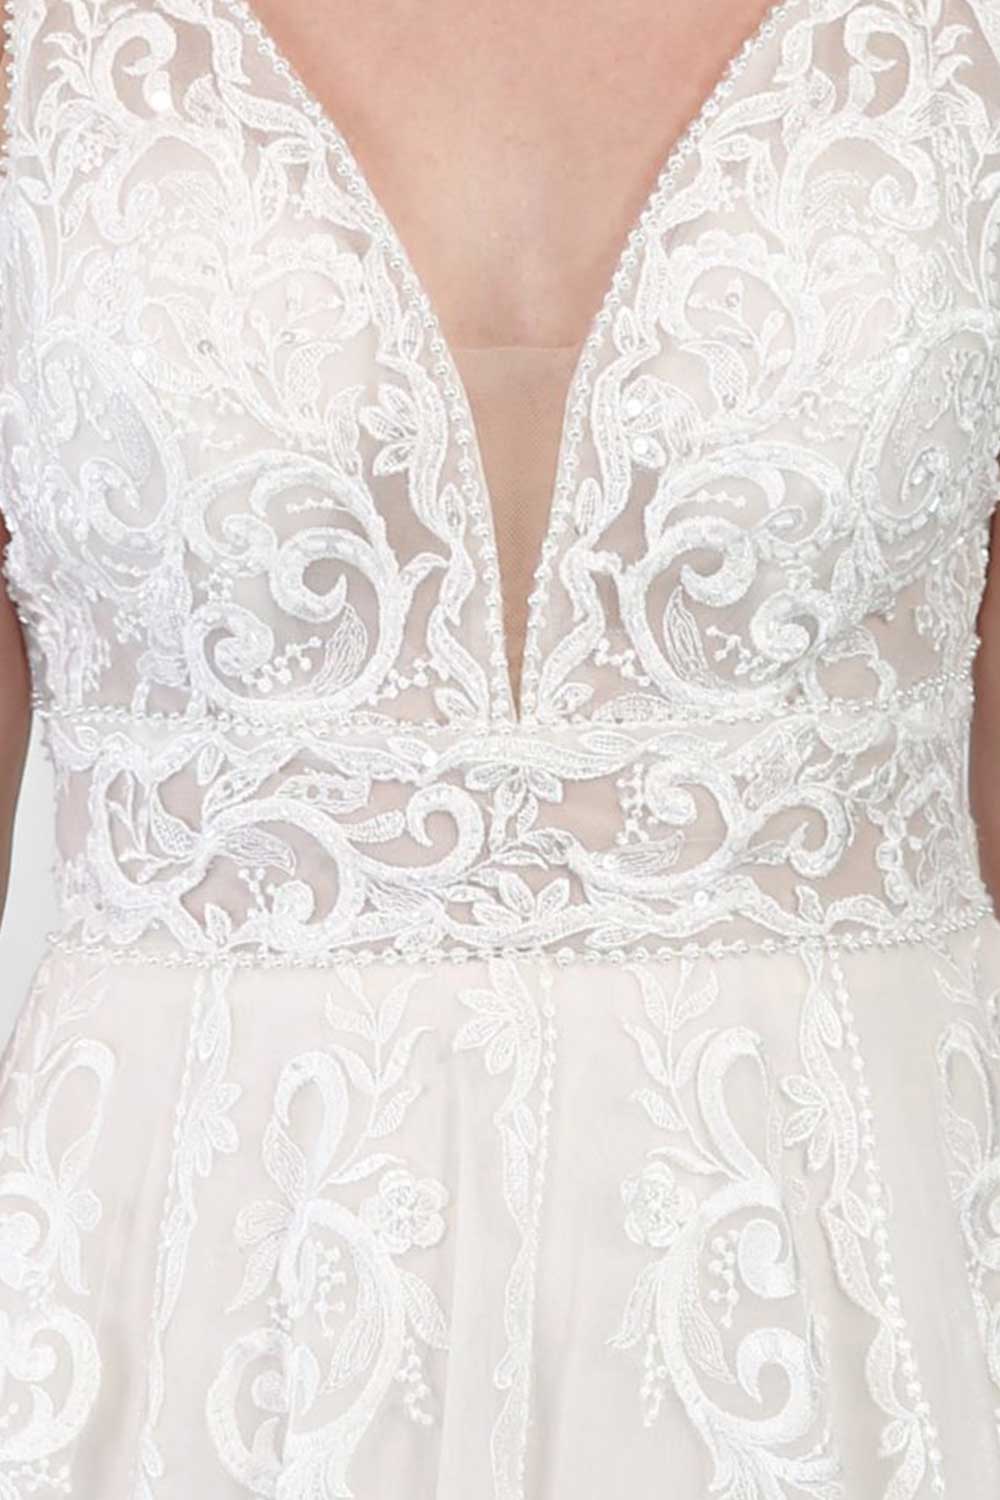 A-line dress with delicate lace detail